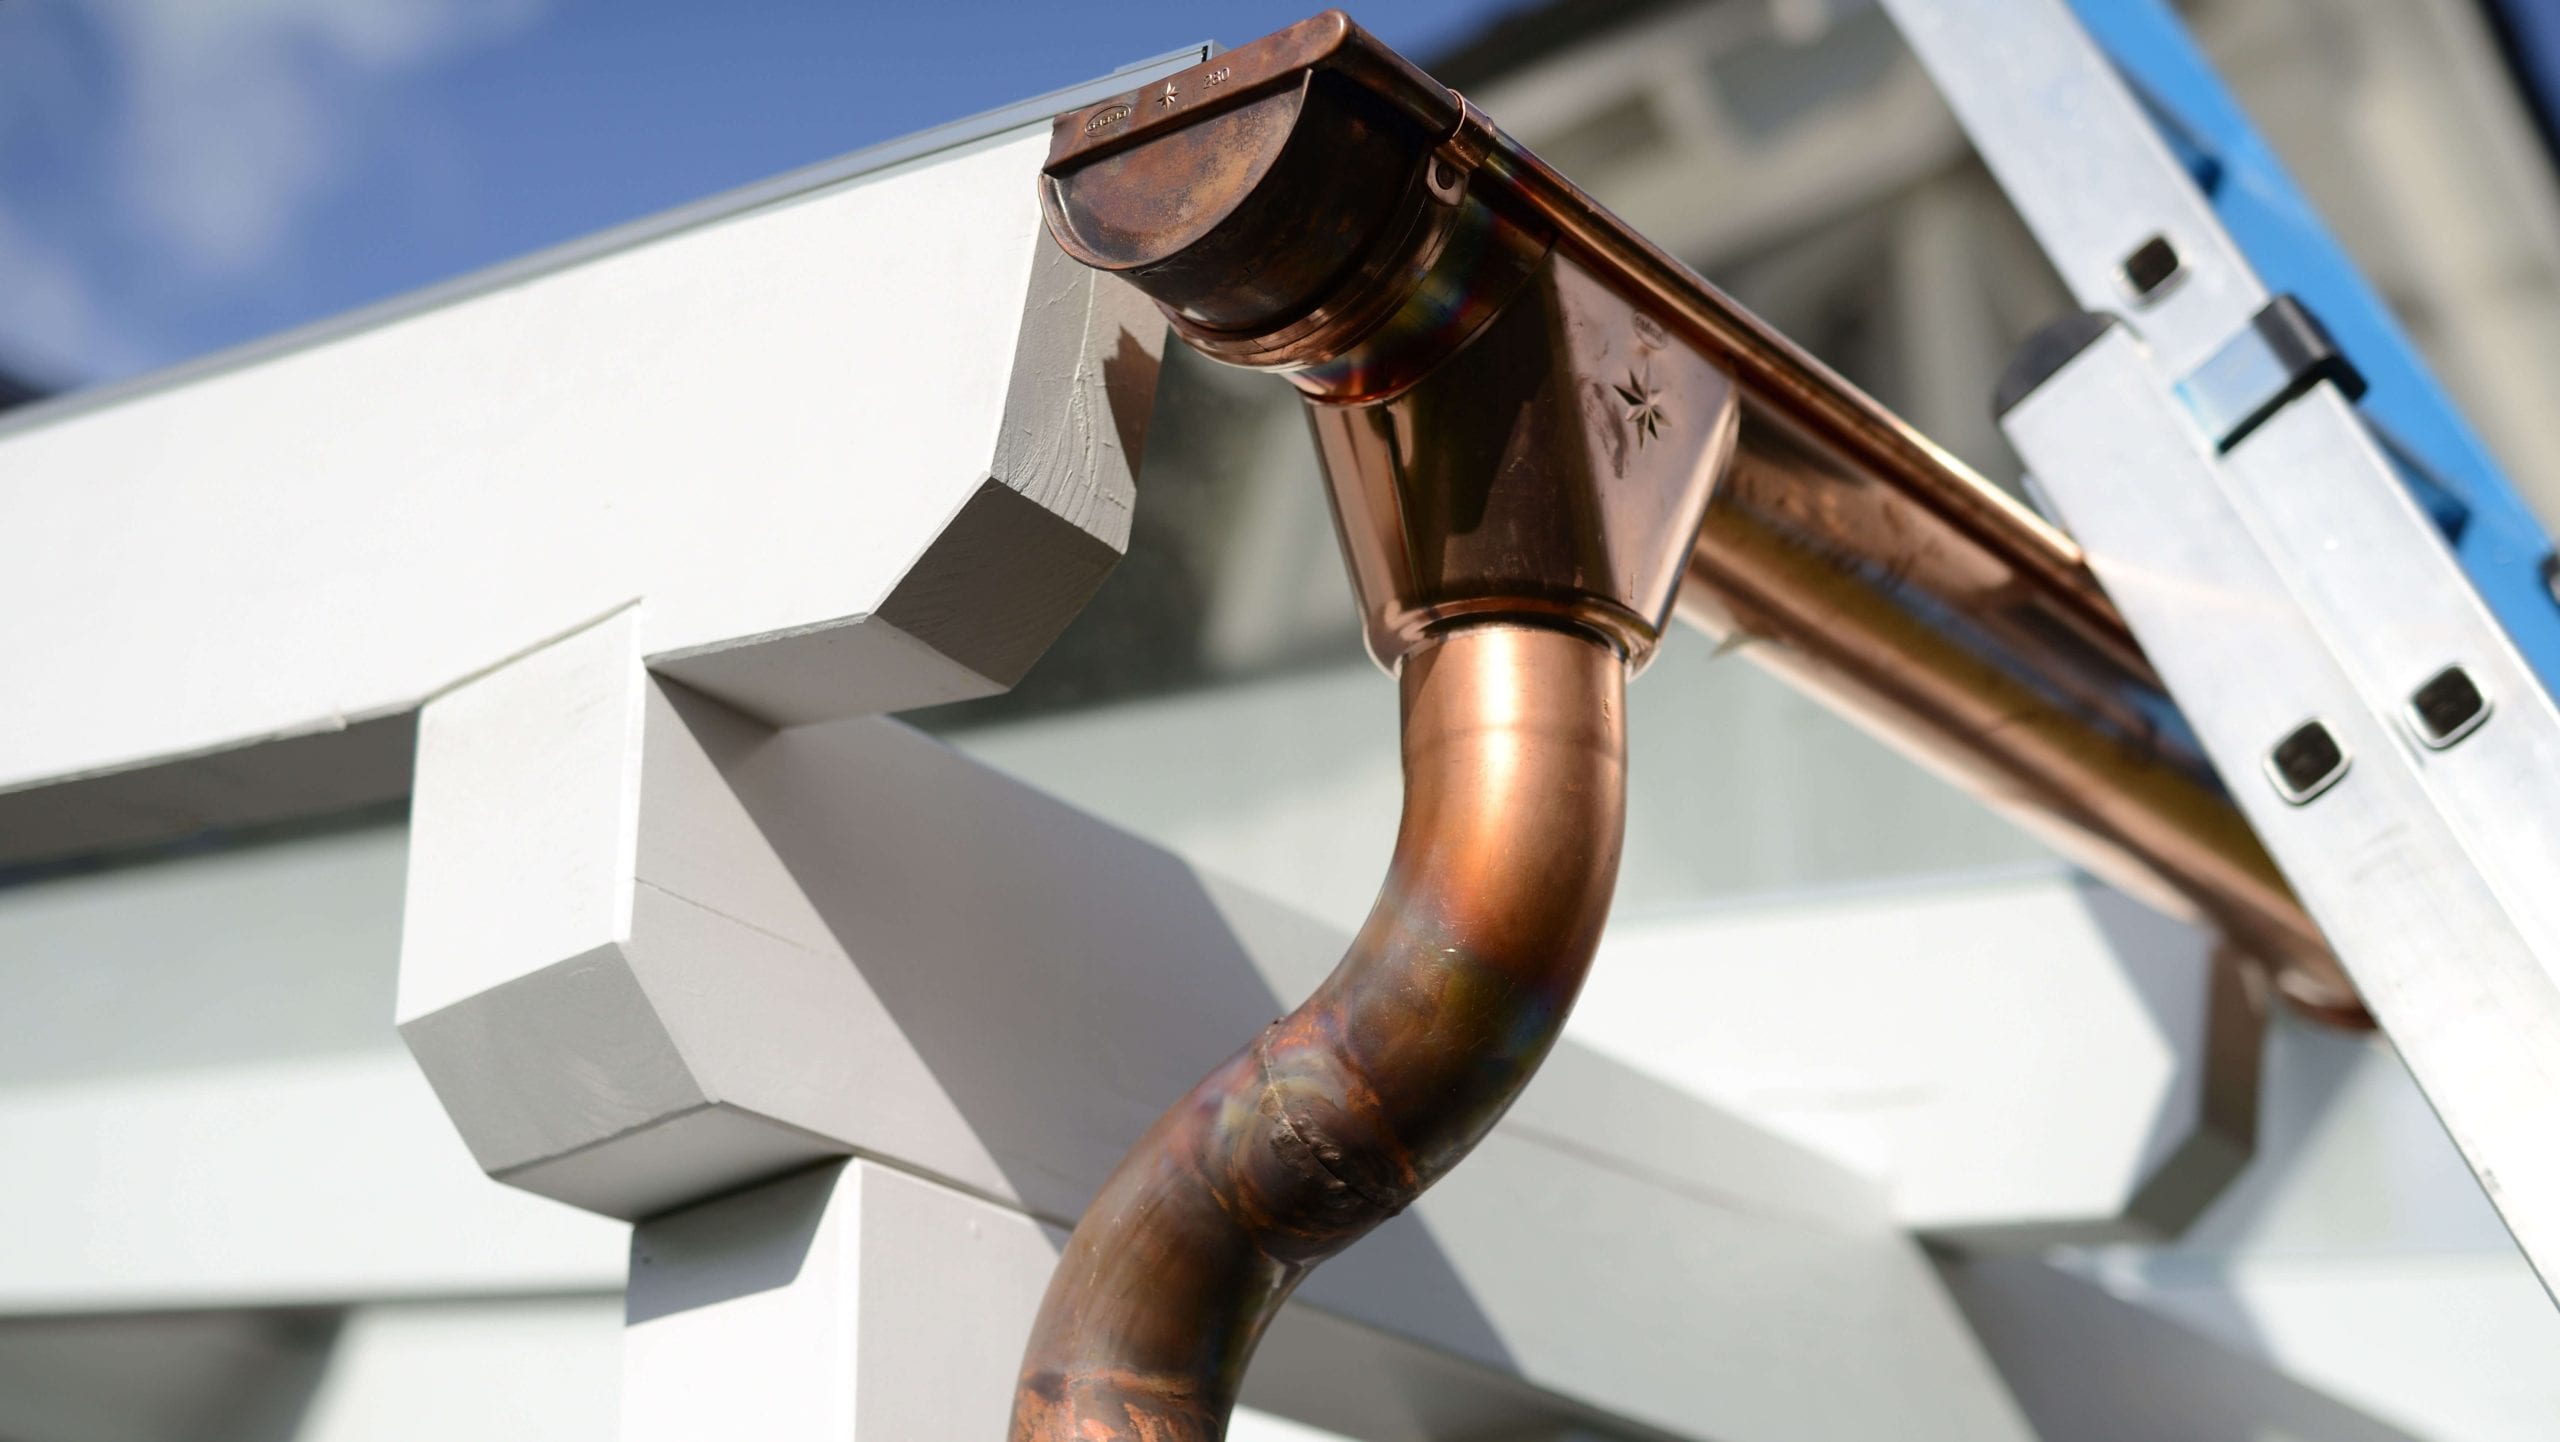 Make your property stand out with copper gutters. Contact for gutter installation in Omaha